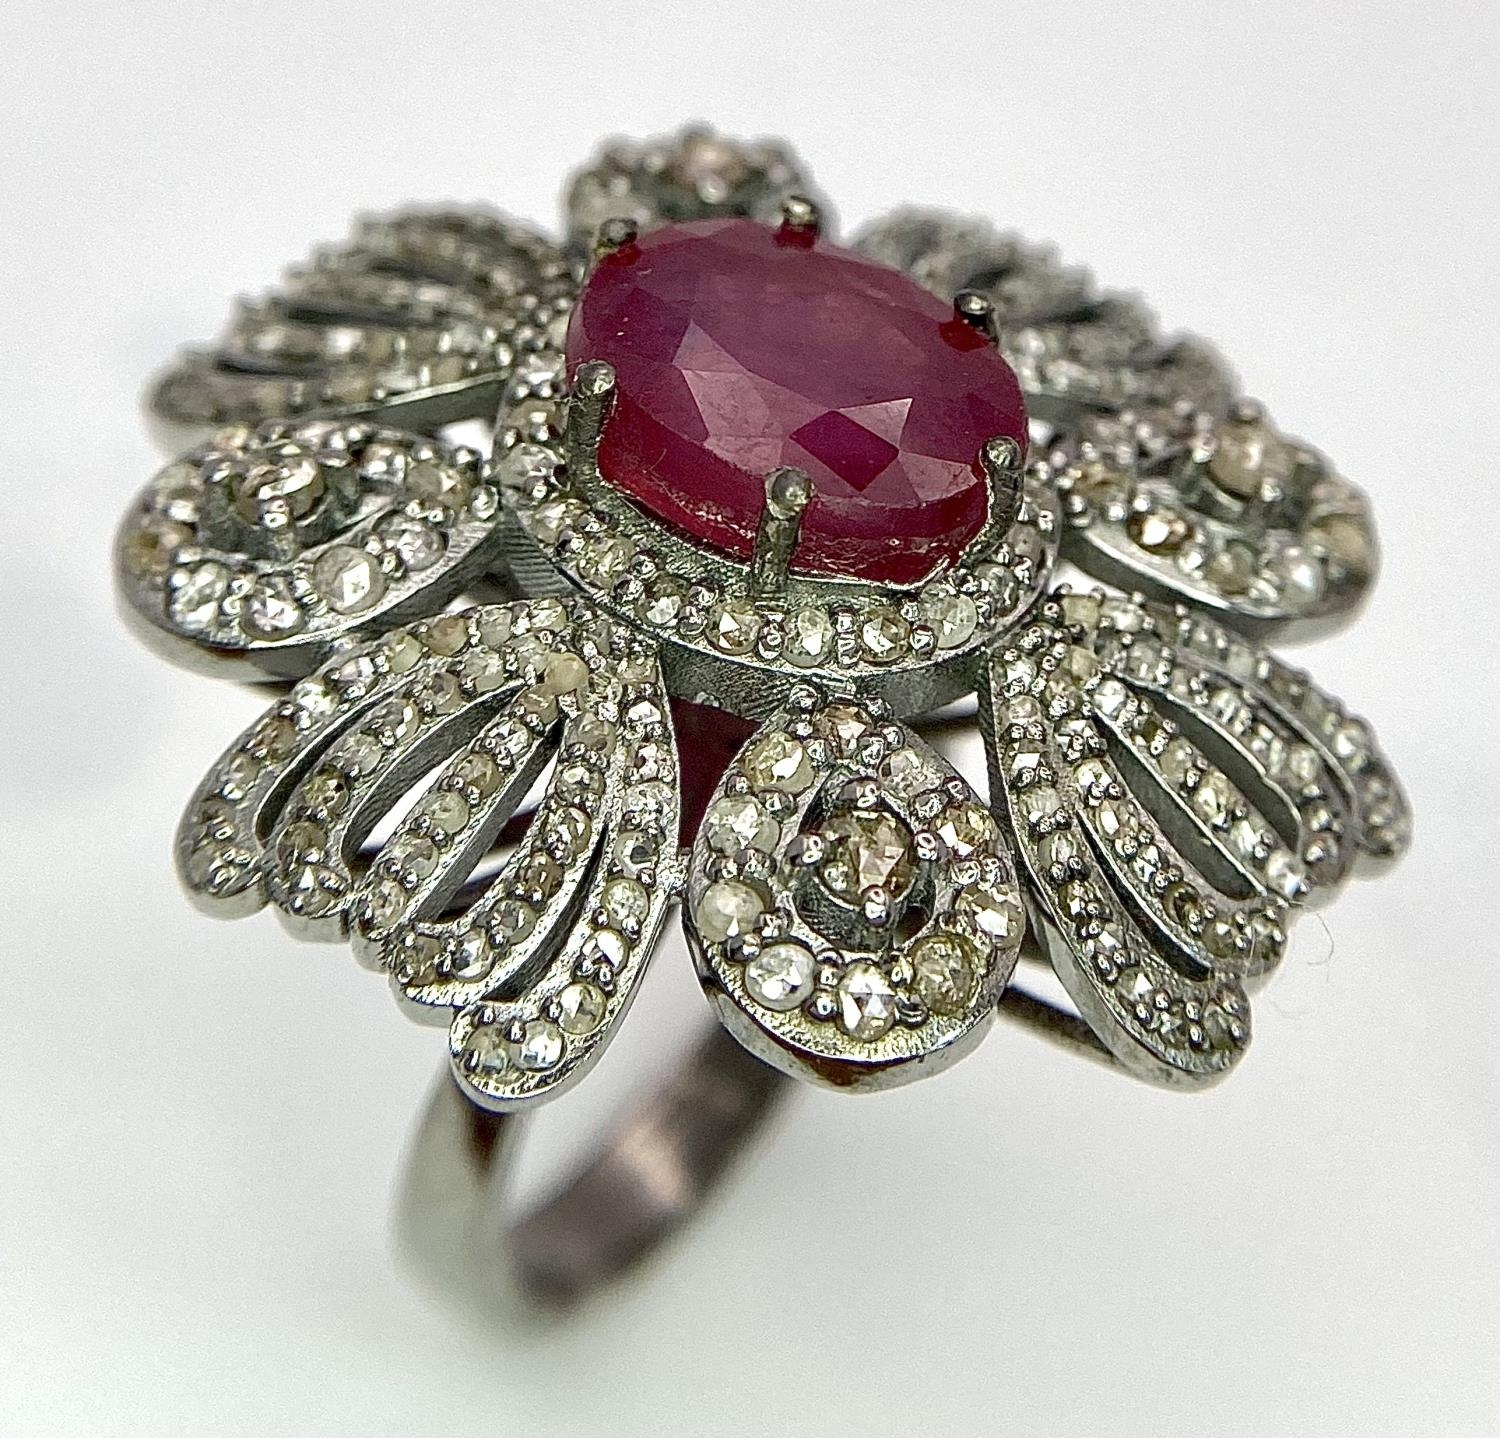 A 5ct Ruby Gemstone Cocktail Ring with 2ctw of Old Cut Diamond Decoration. Set in 925 Silver. Size - Image 2 of 6